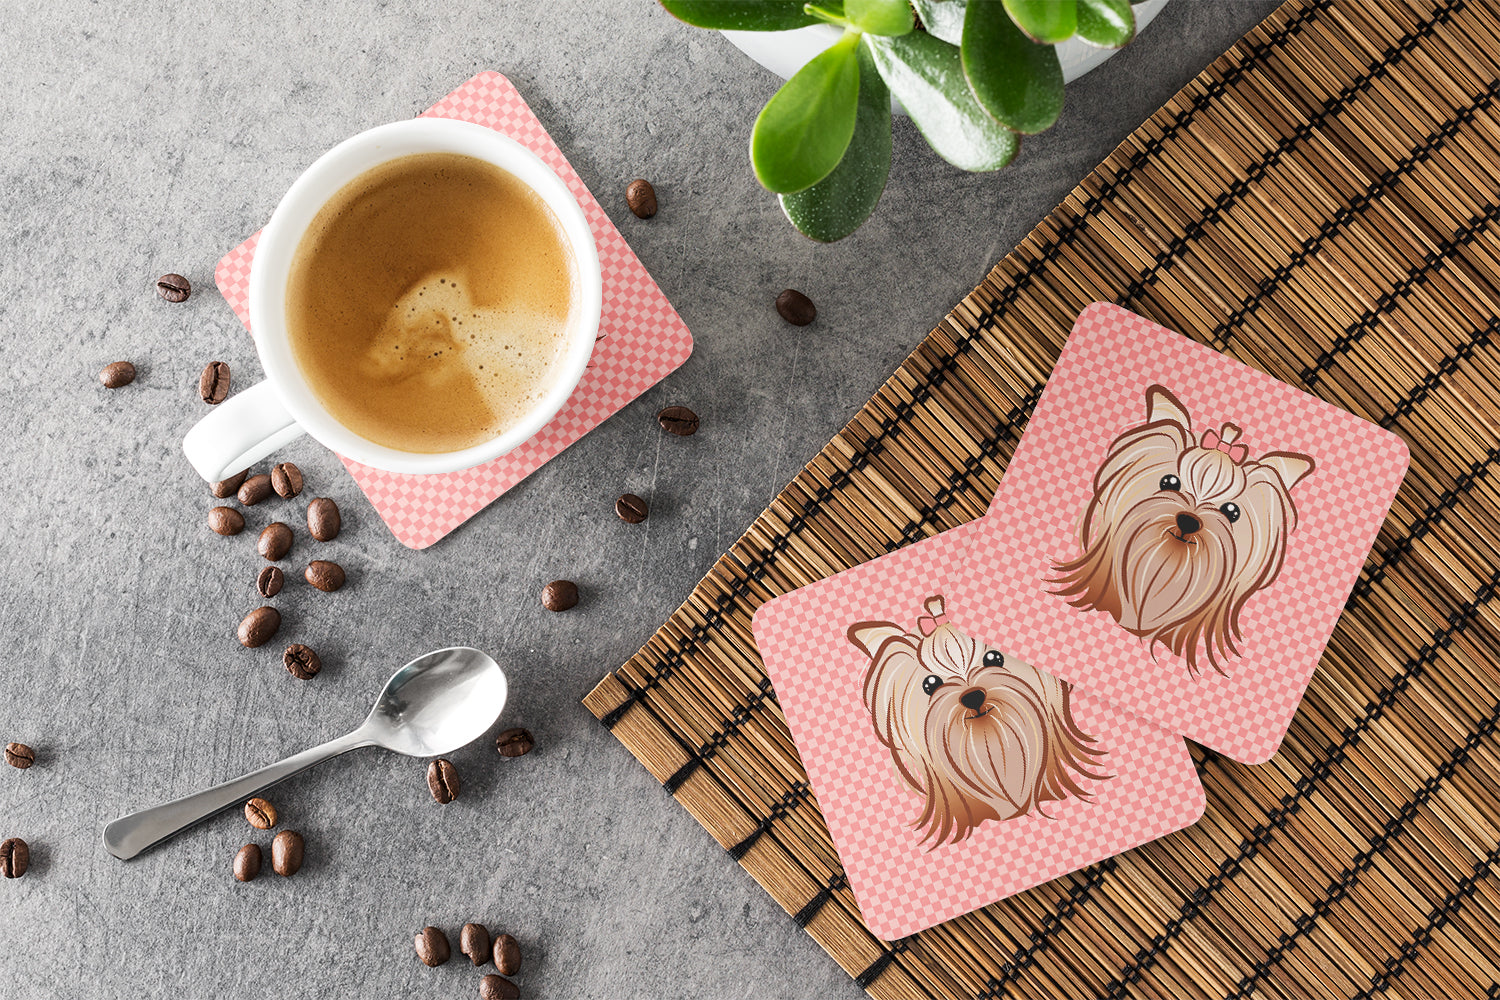 Set of 4 Pink Checkered Yorkie / Yorkshire Terrier Foam Coasters BB1138FC - the-store.com